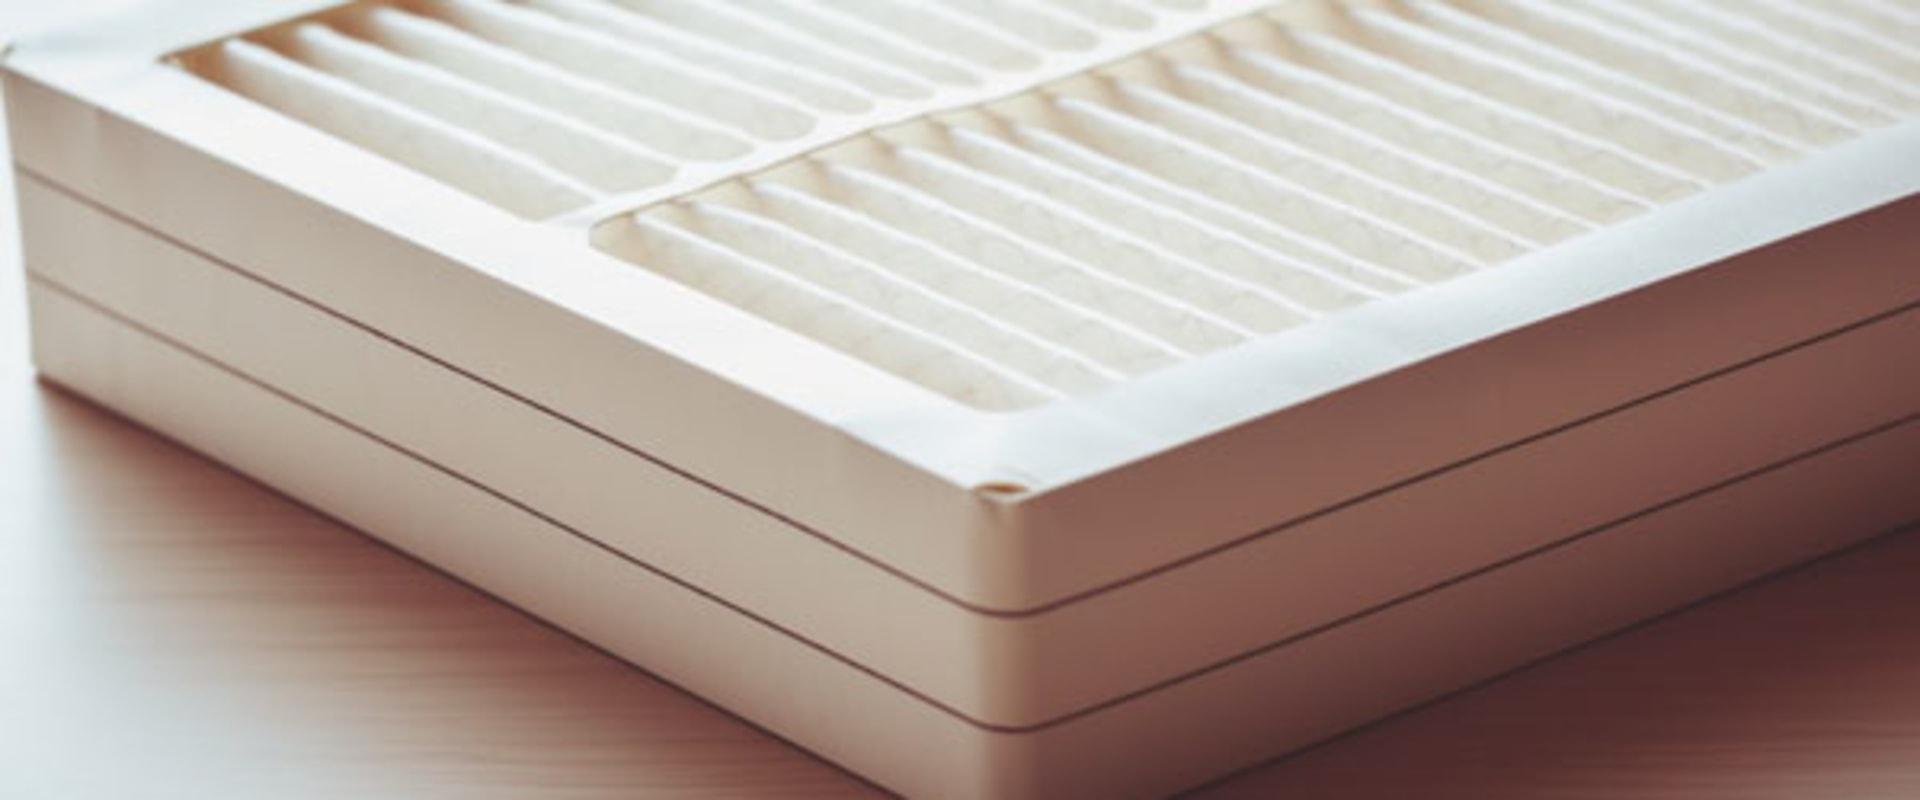 Best Air Filter Replacement Options for Asthma Relief